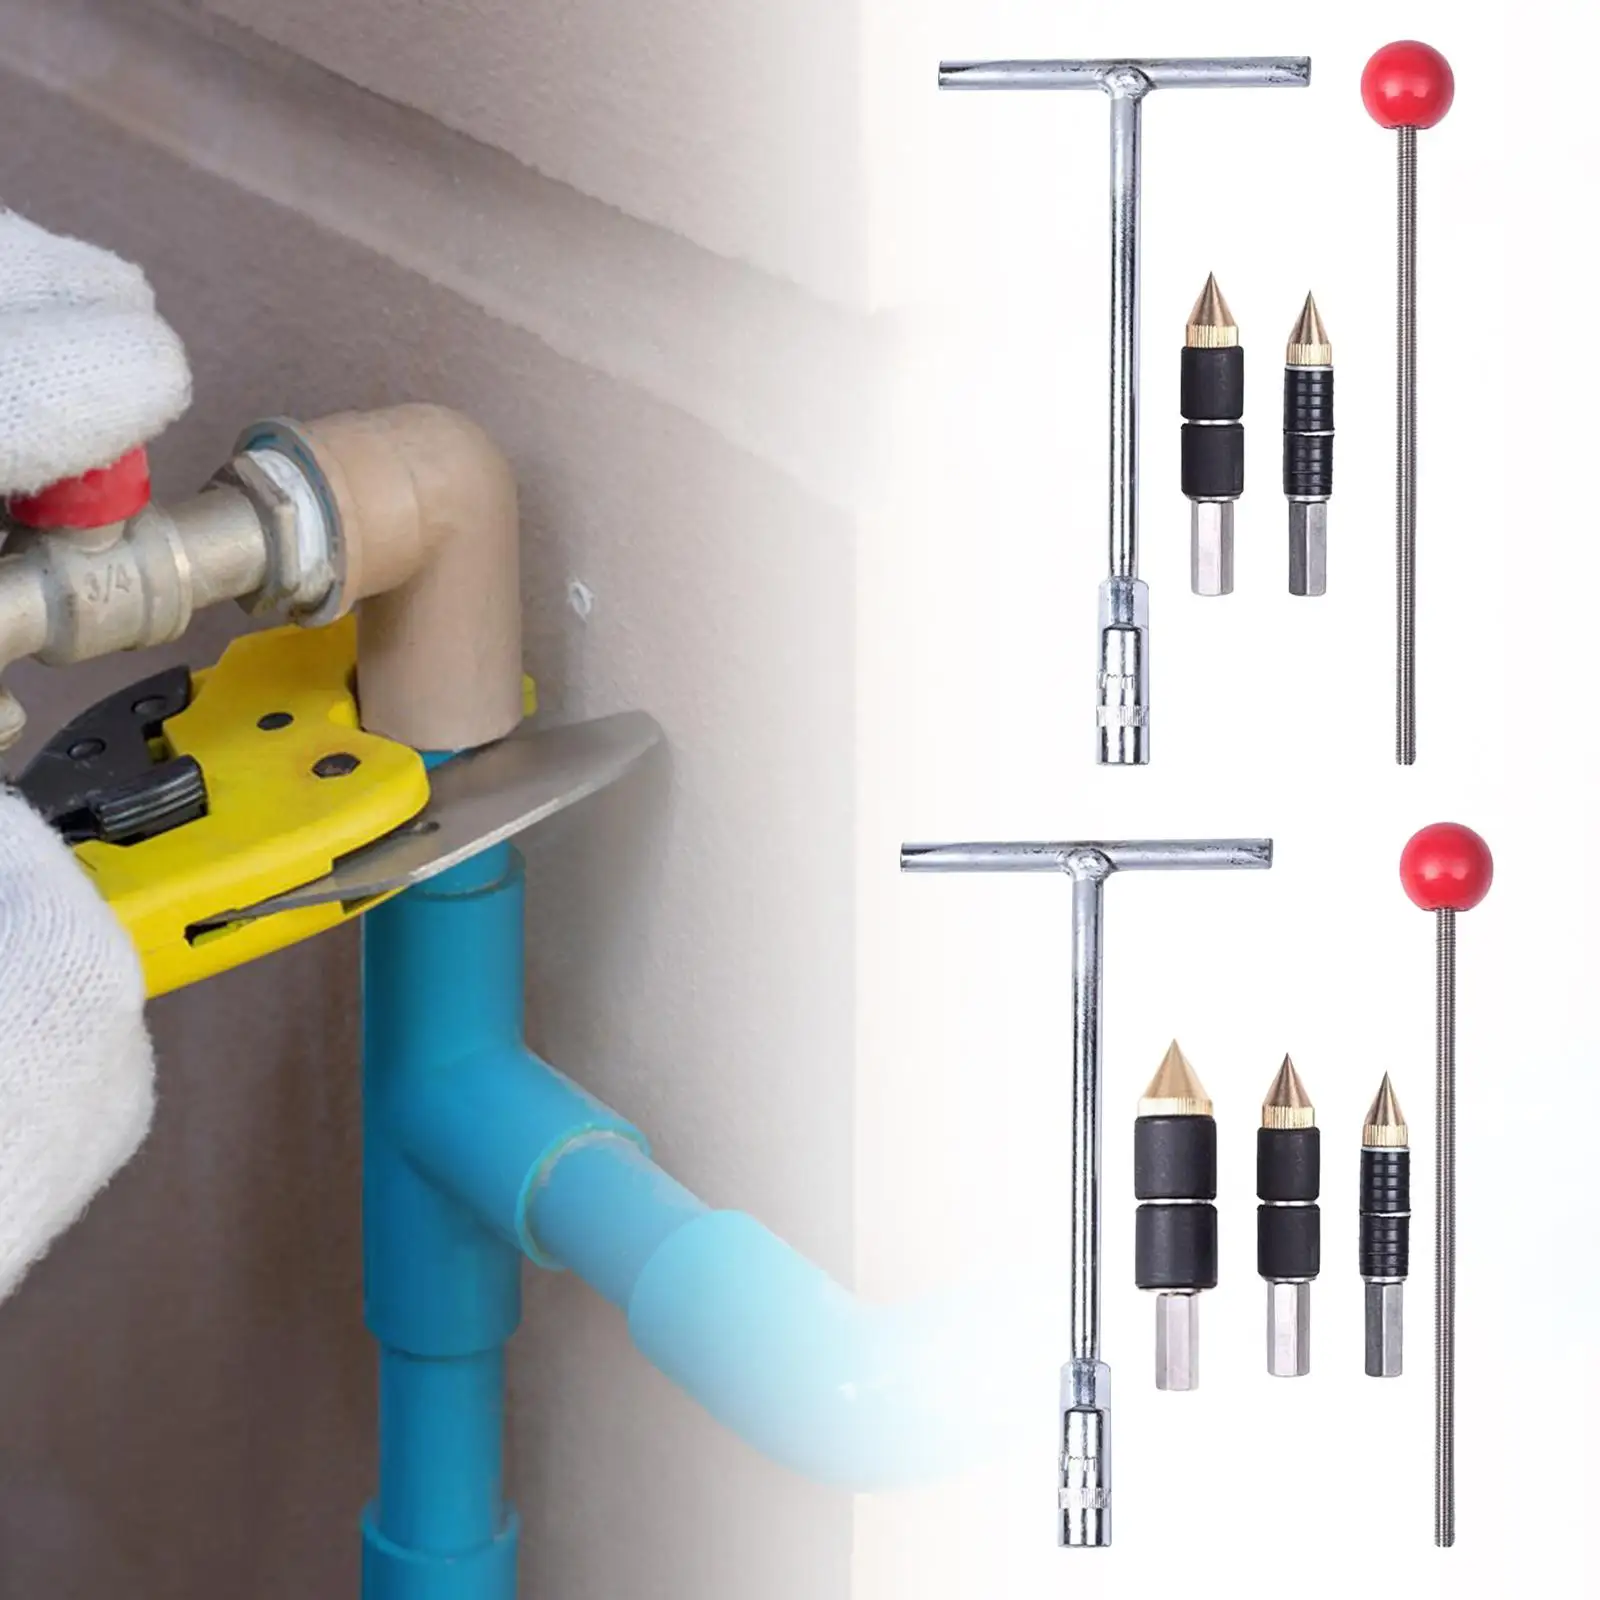 Ppr Tube pin Spare Parts Waterstop Accessories Repair Tools Reusable Durable for Plugging Tunnels Locking Bathroom